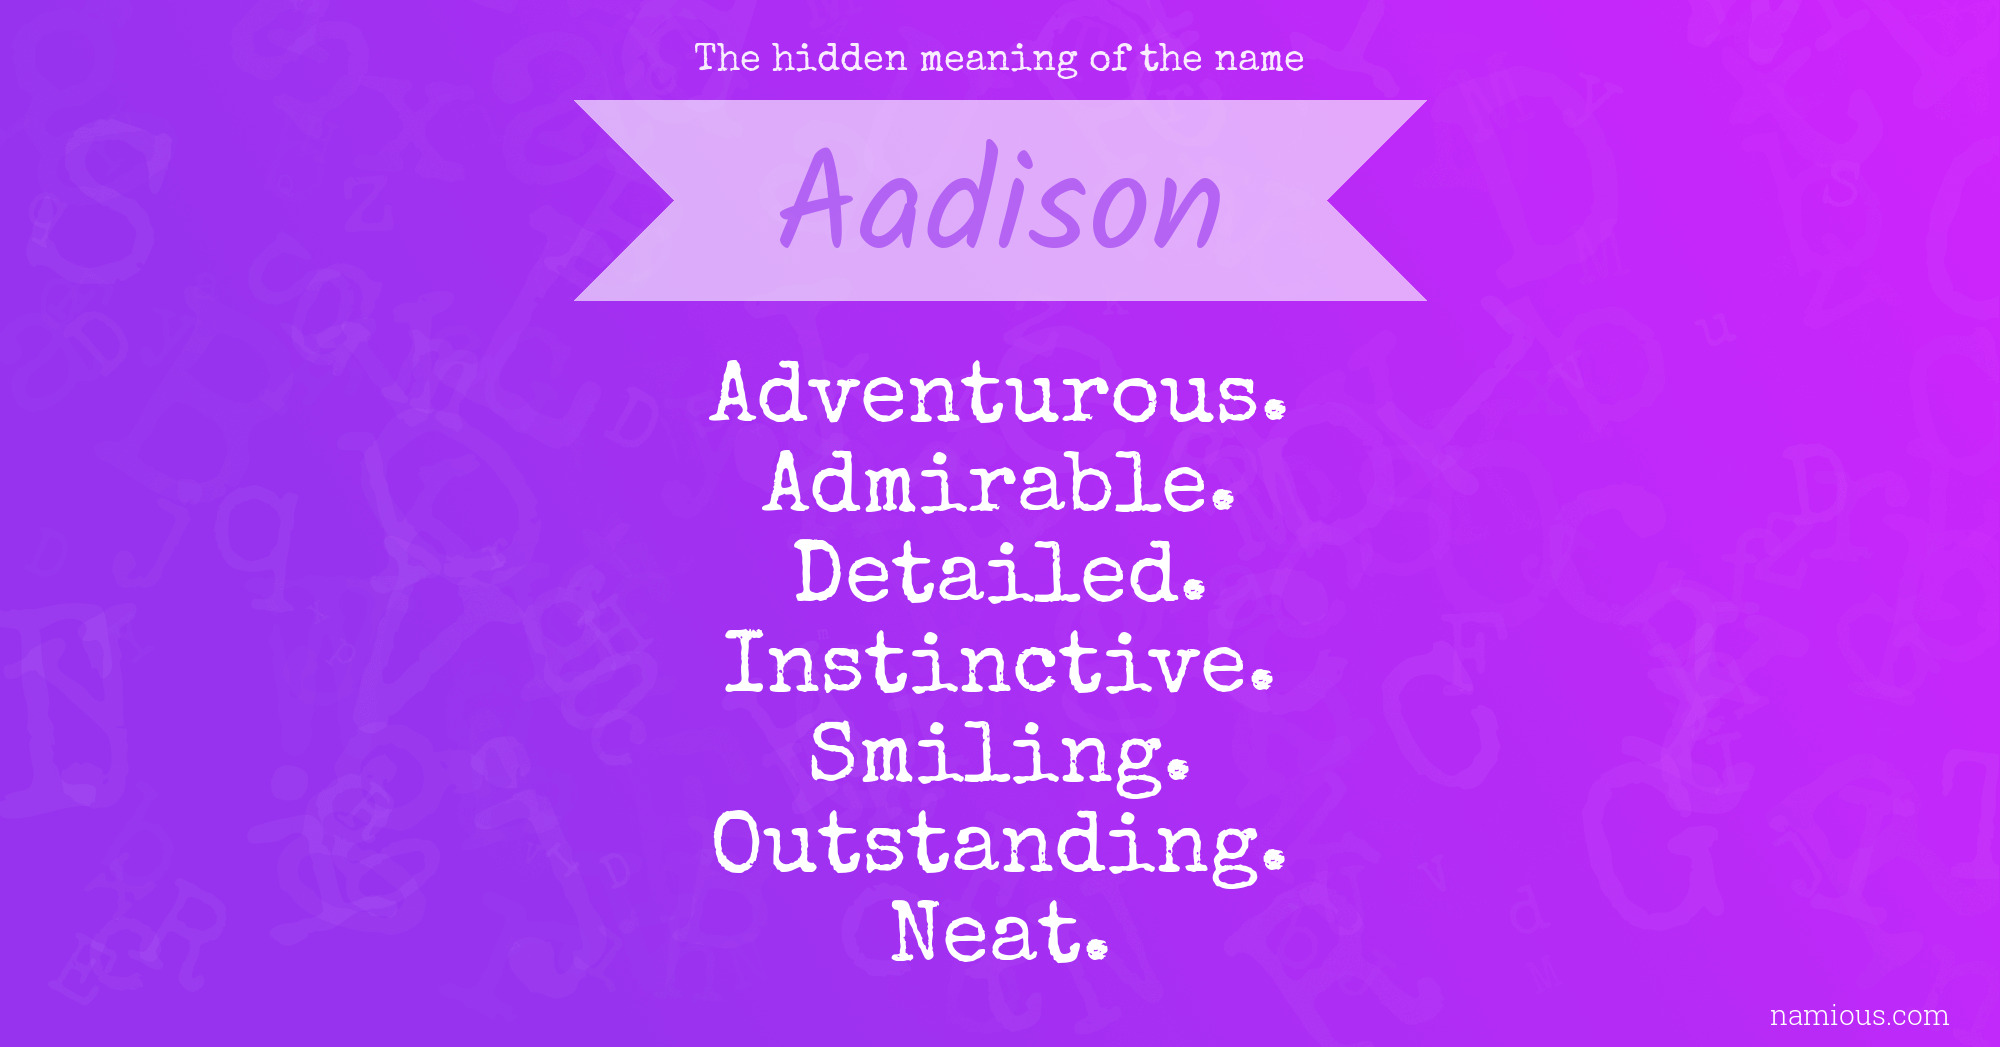 The hidden meaning of the name Aadison